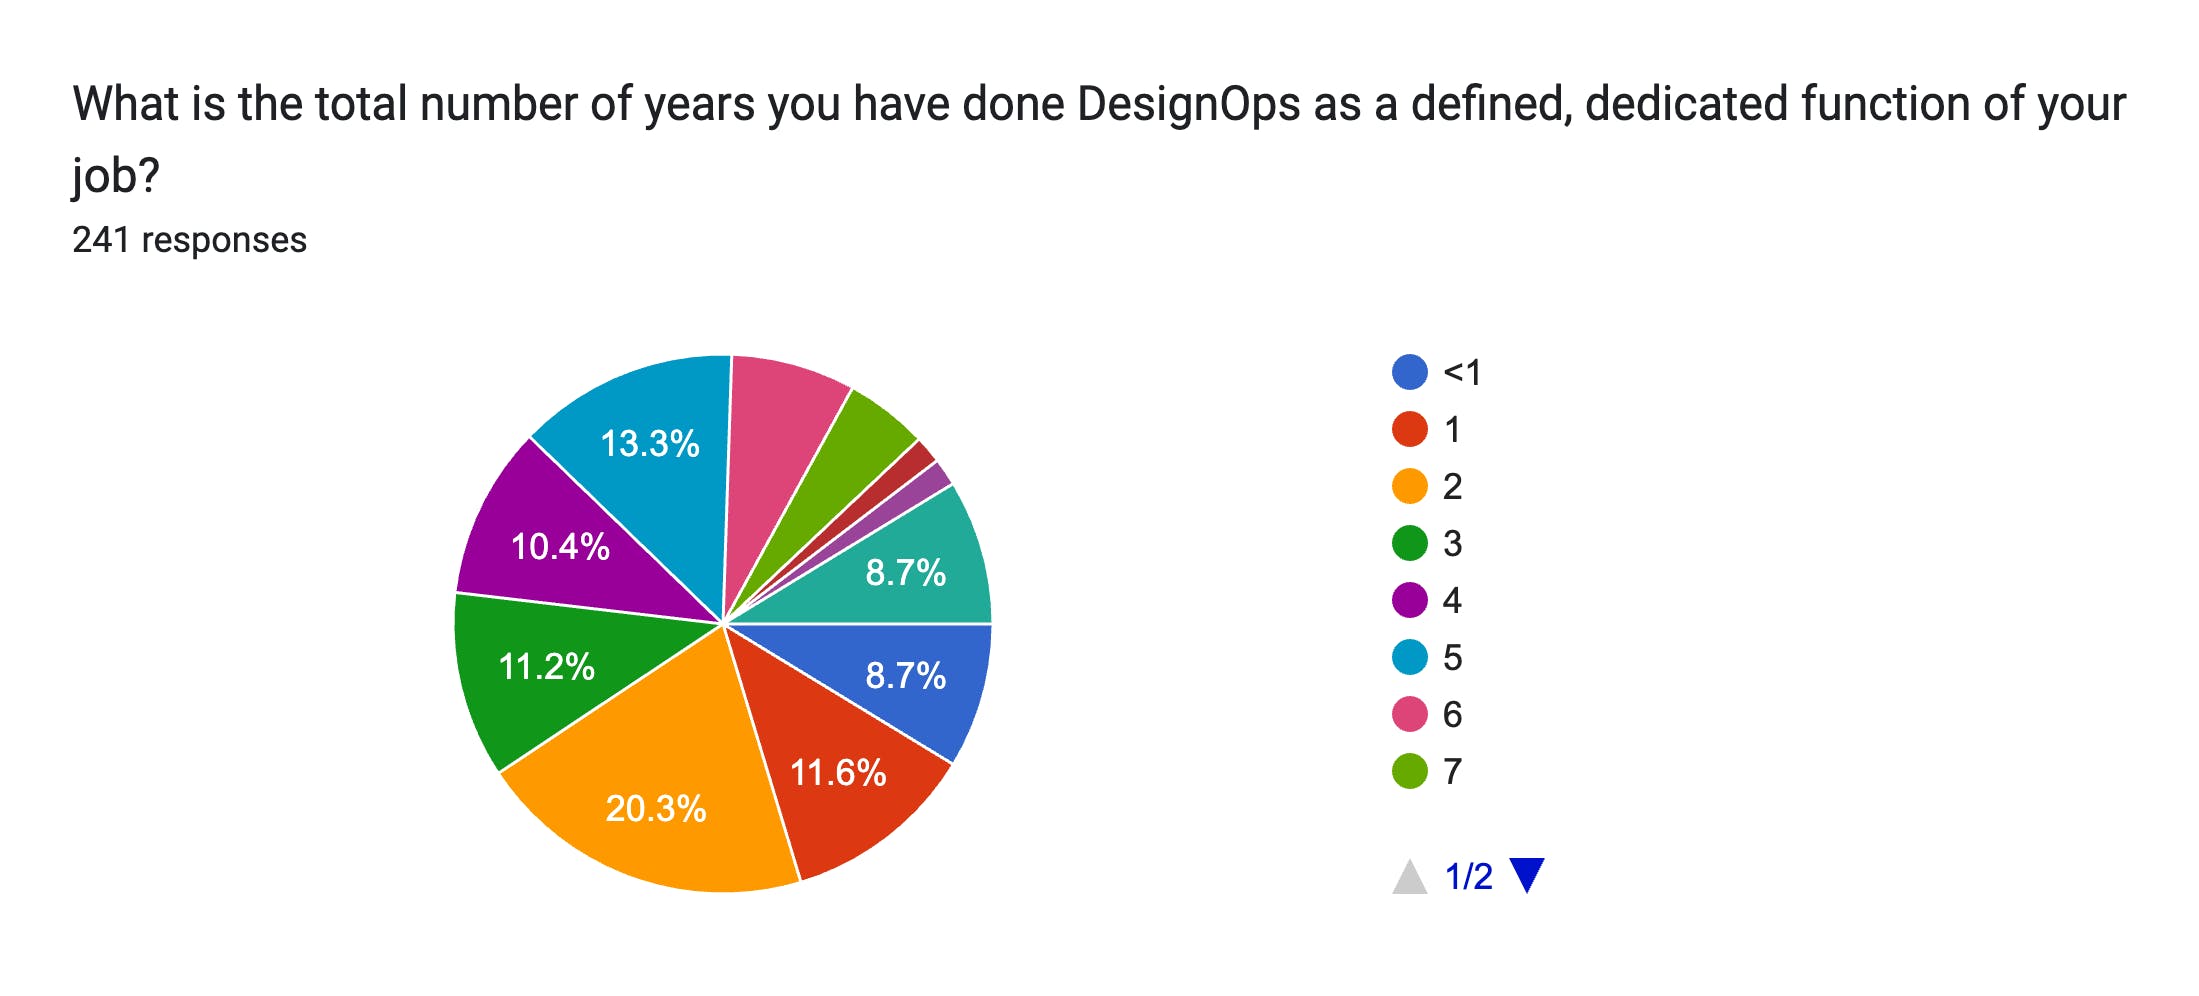 Forms response chart. Question title: What is the total number of years you have done DesignOps as a defined, dedicated function of your job?
. Number of responses: 241 responses.